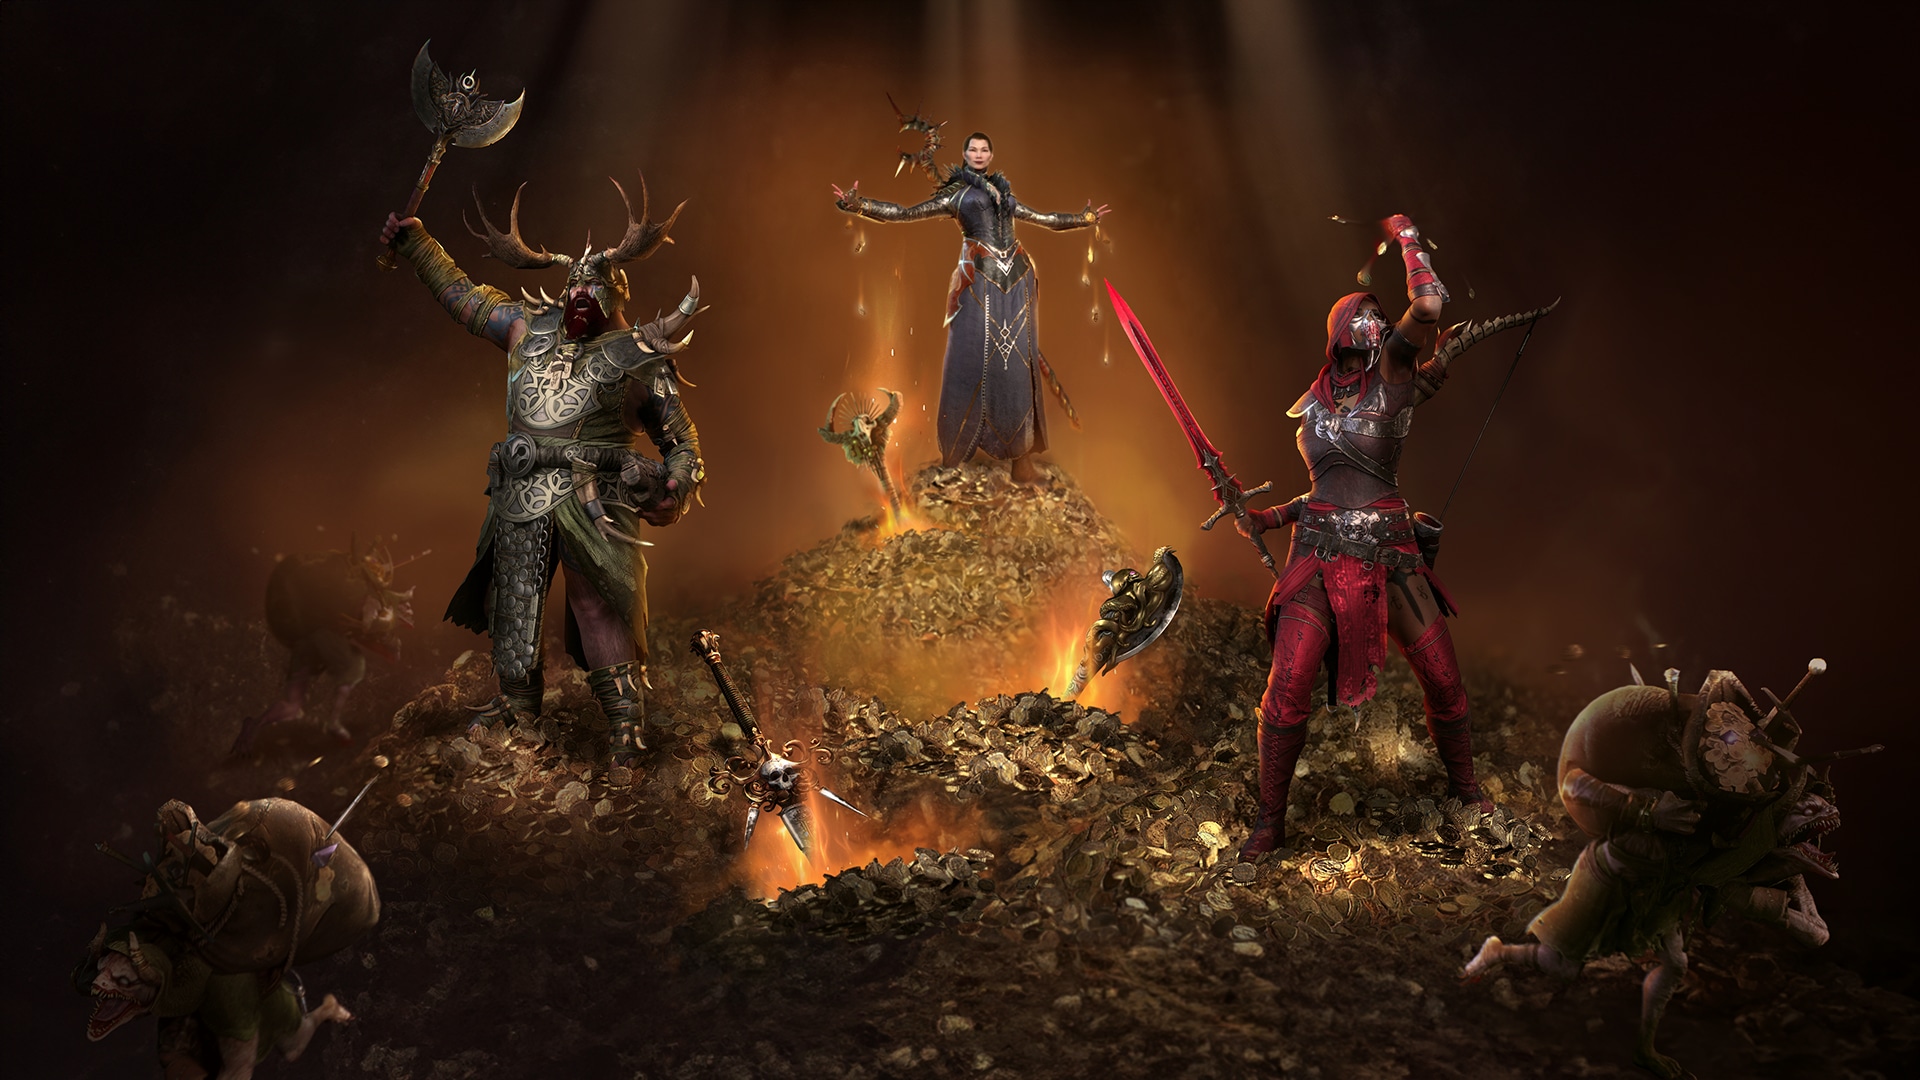 Art showing Diablo characters celebrating atop piles of gold while treasure goblins flee